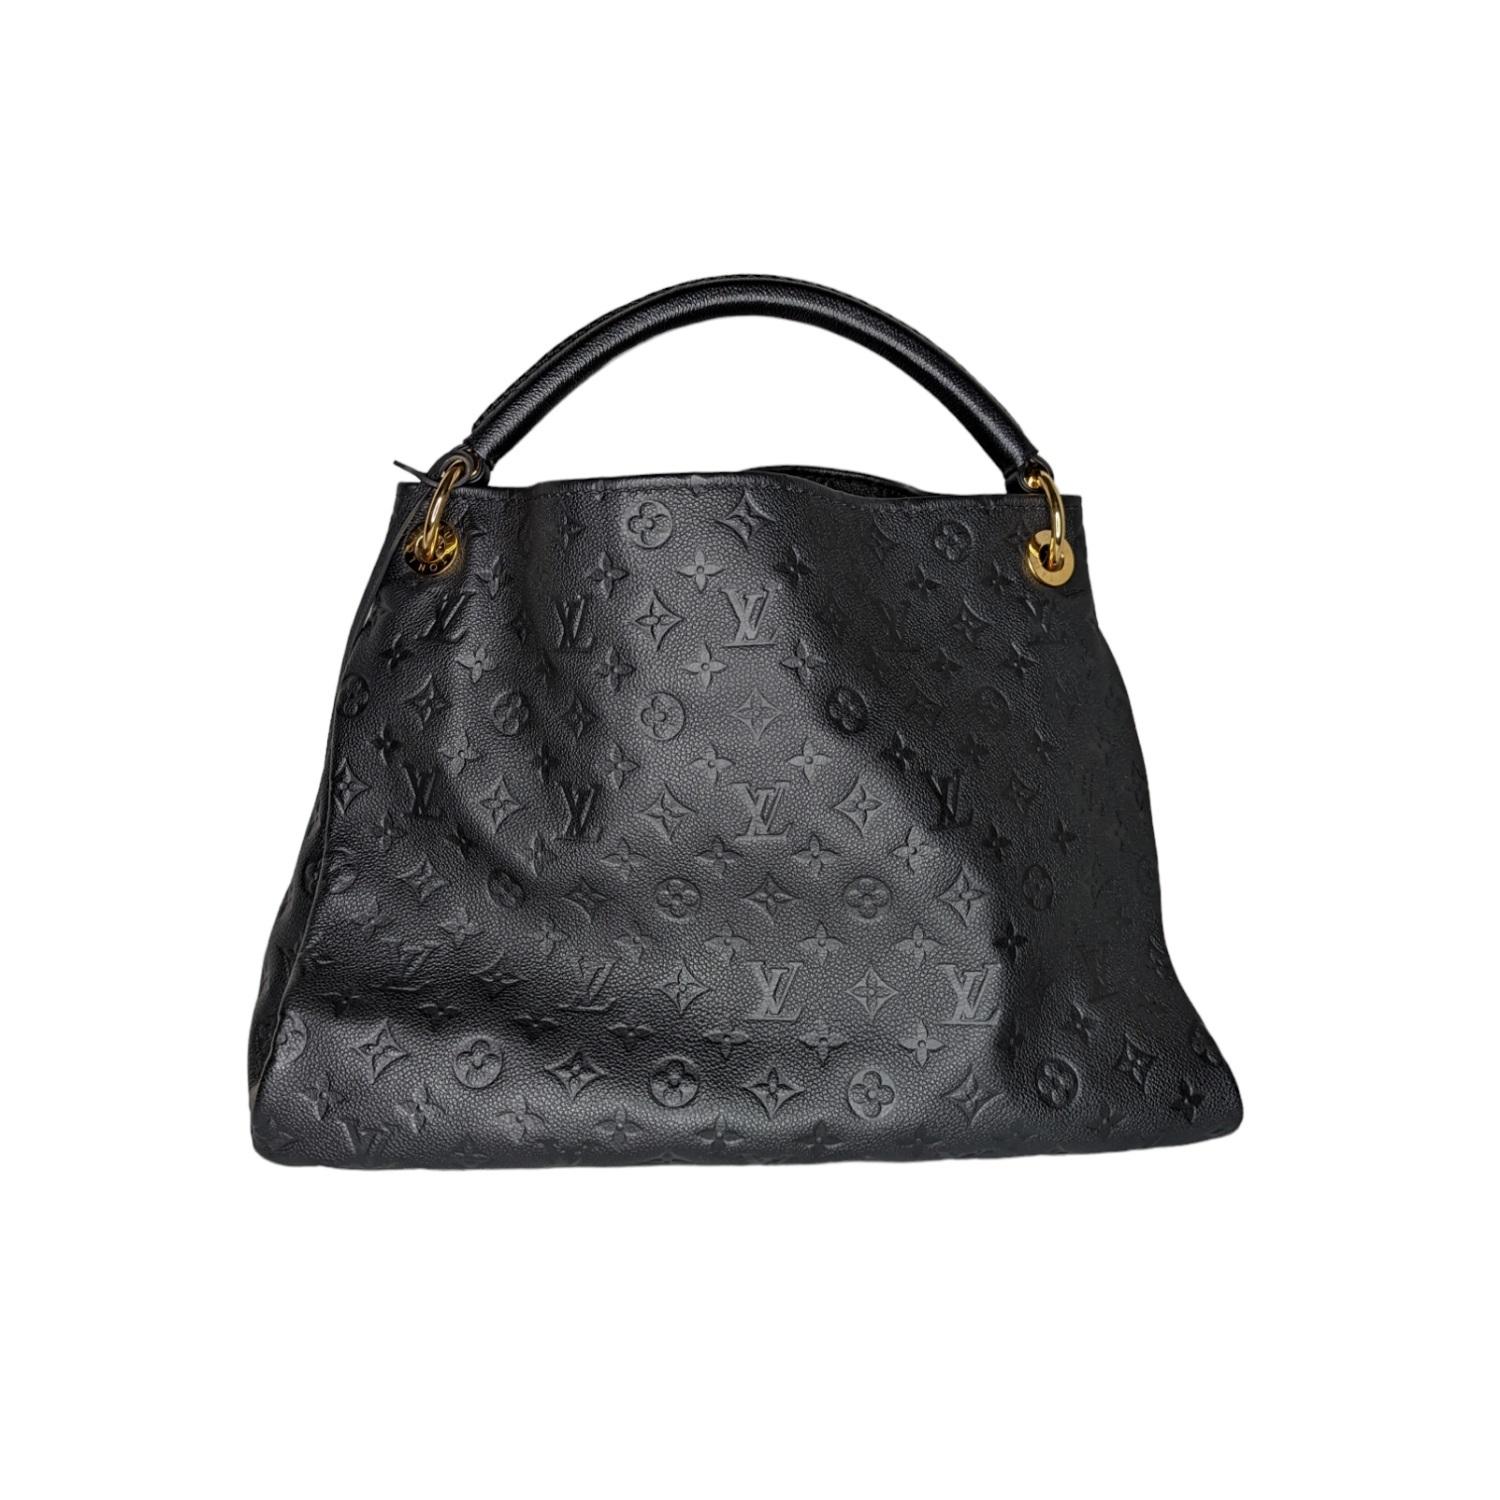 The Artsy handbag delights with its refined craftsmanship and functional features. Fashioned from supple Monogram Empreinte embossed leather, this quietly luxurious hobo features a handmade, cross-stitched handle that slips easily over the shoulder.